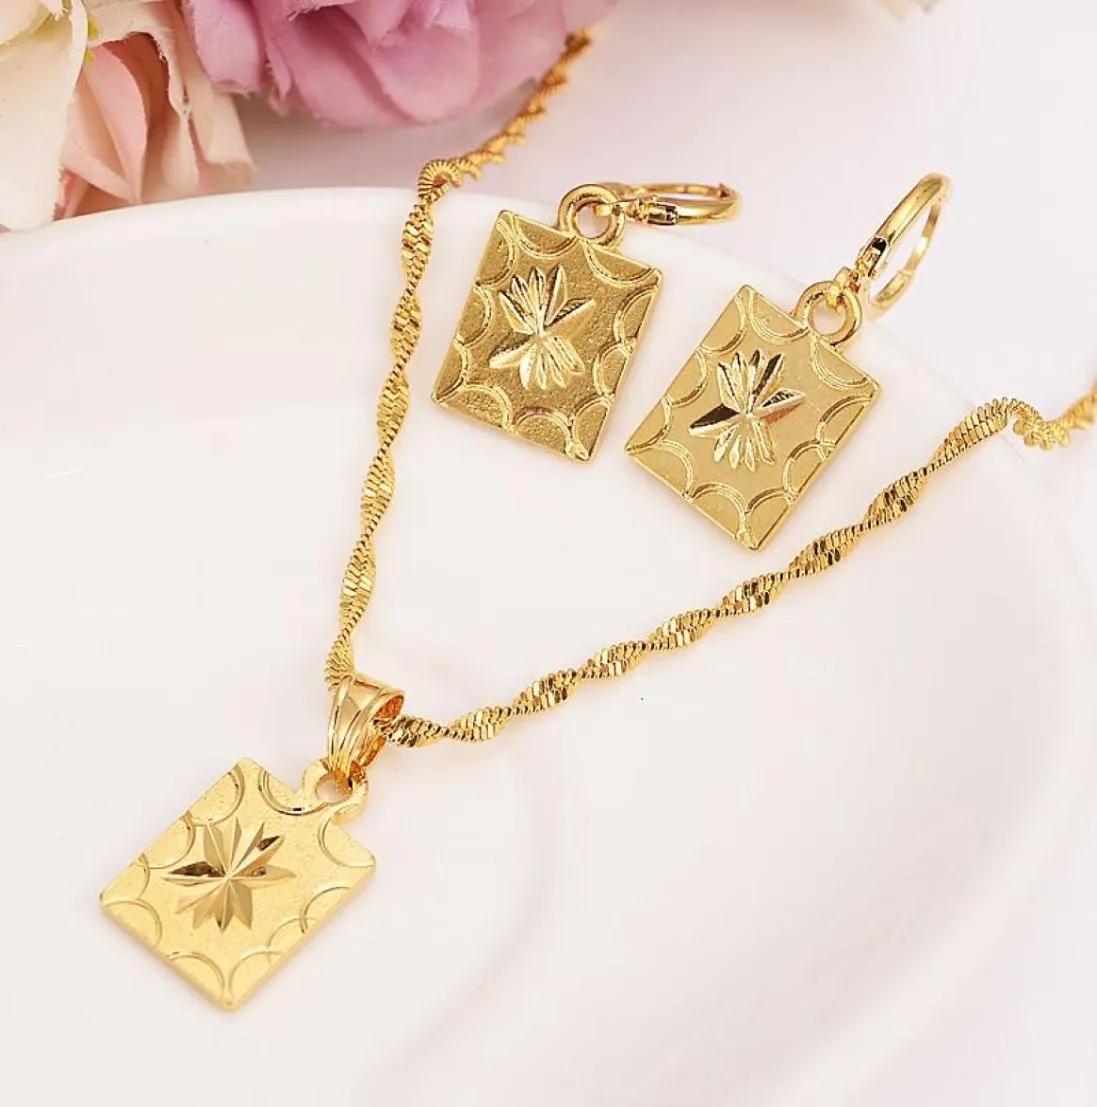 african dubaii india arab Fashion Shield Pendant Necklace Set Women Party Gift Solid Gold Filled square Earrings Jewelry Sets5471028